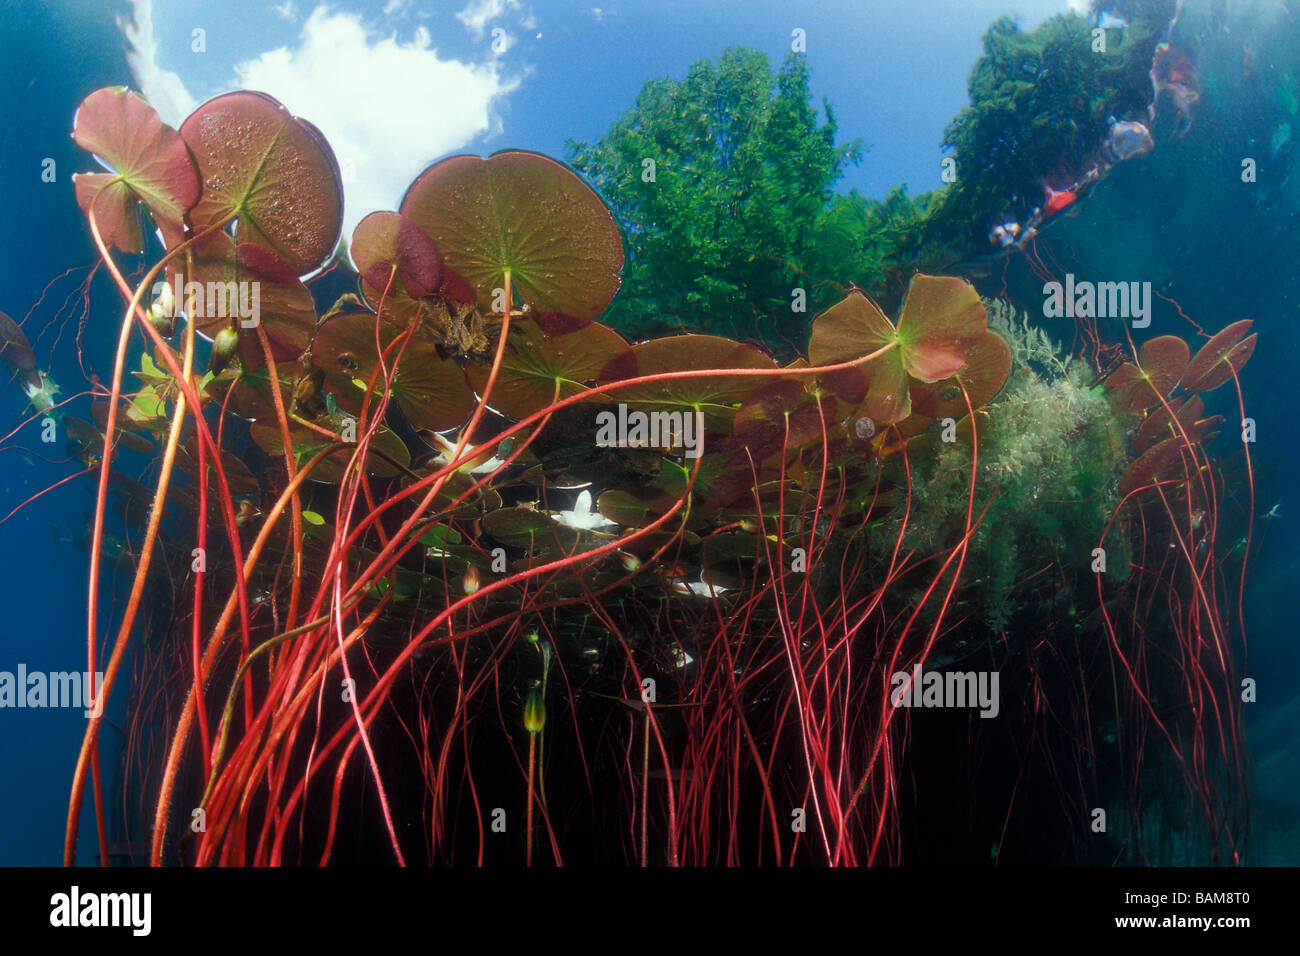 Pond of Waterlily Nymphaea Aliwal Shoal South Africa Stock Photo